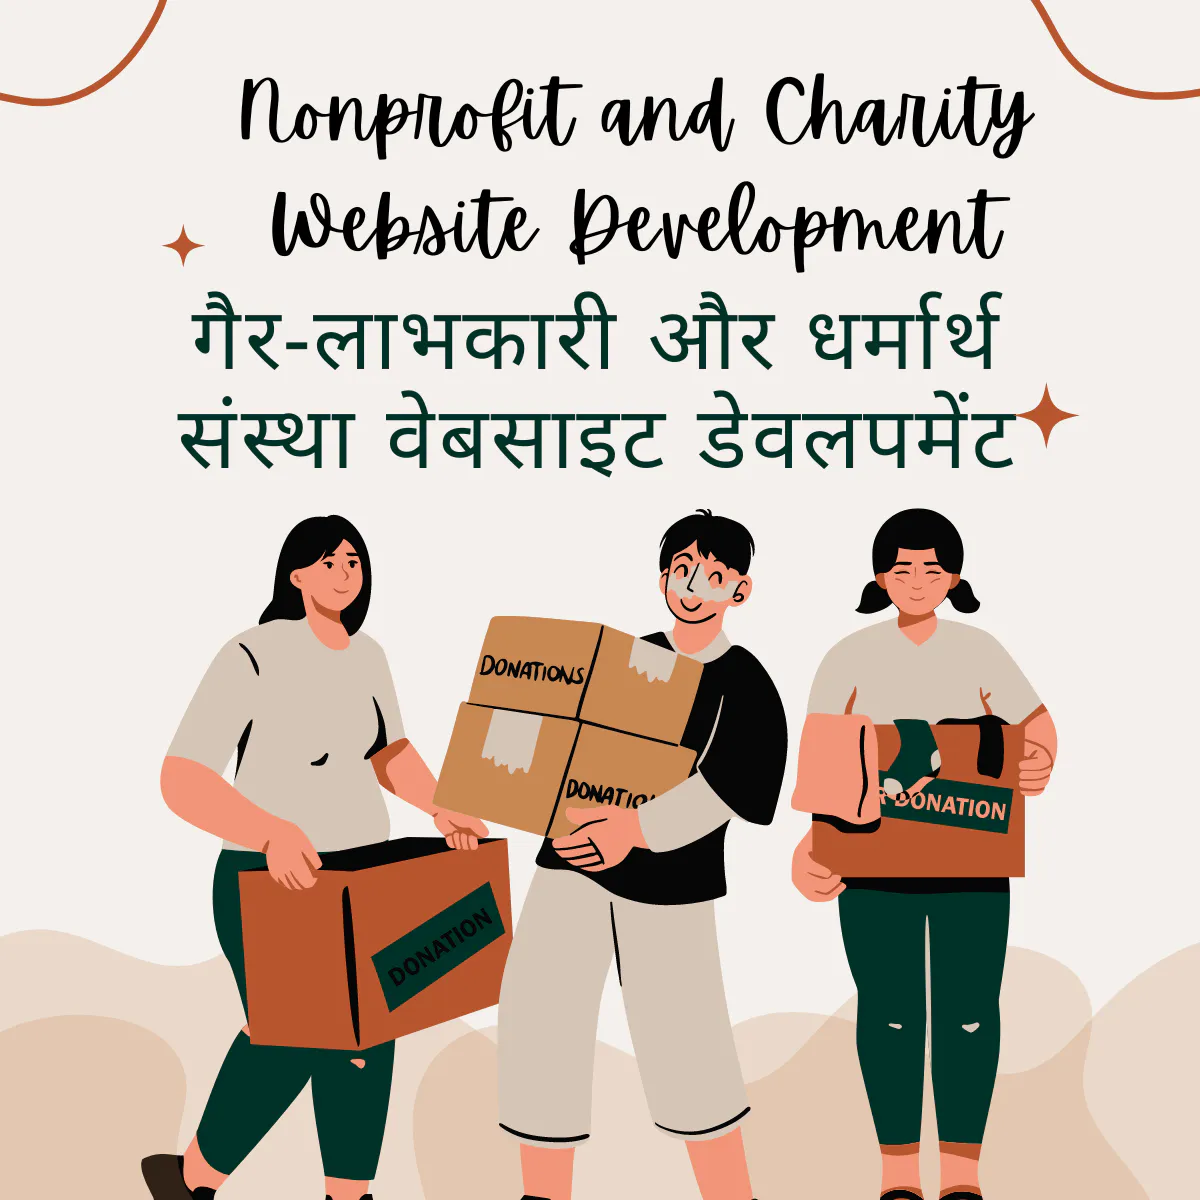 Nonprofit and Charity Website Development